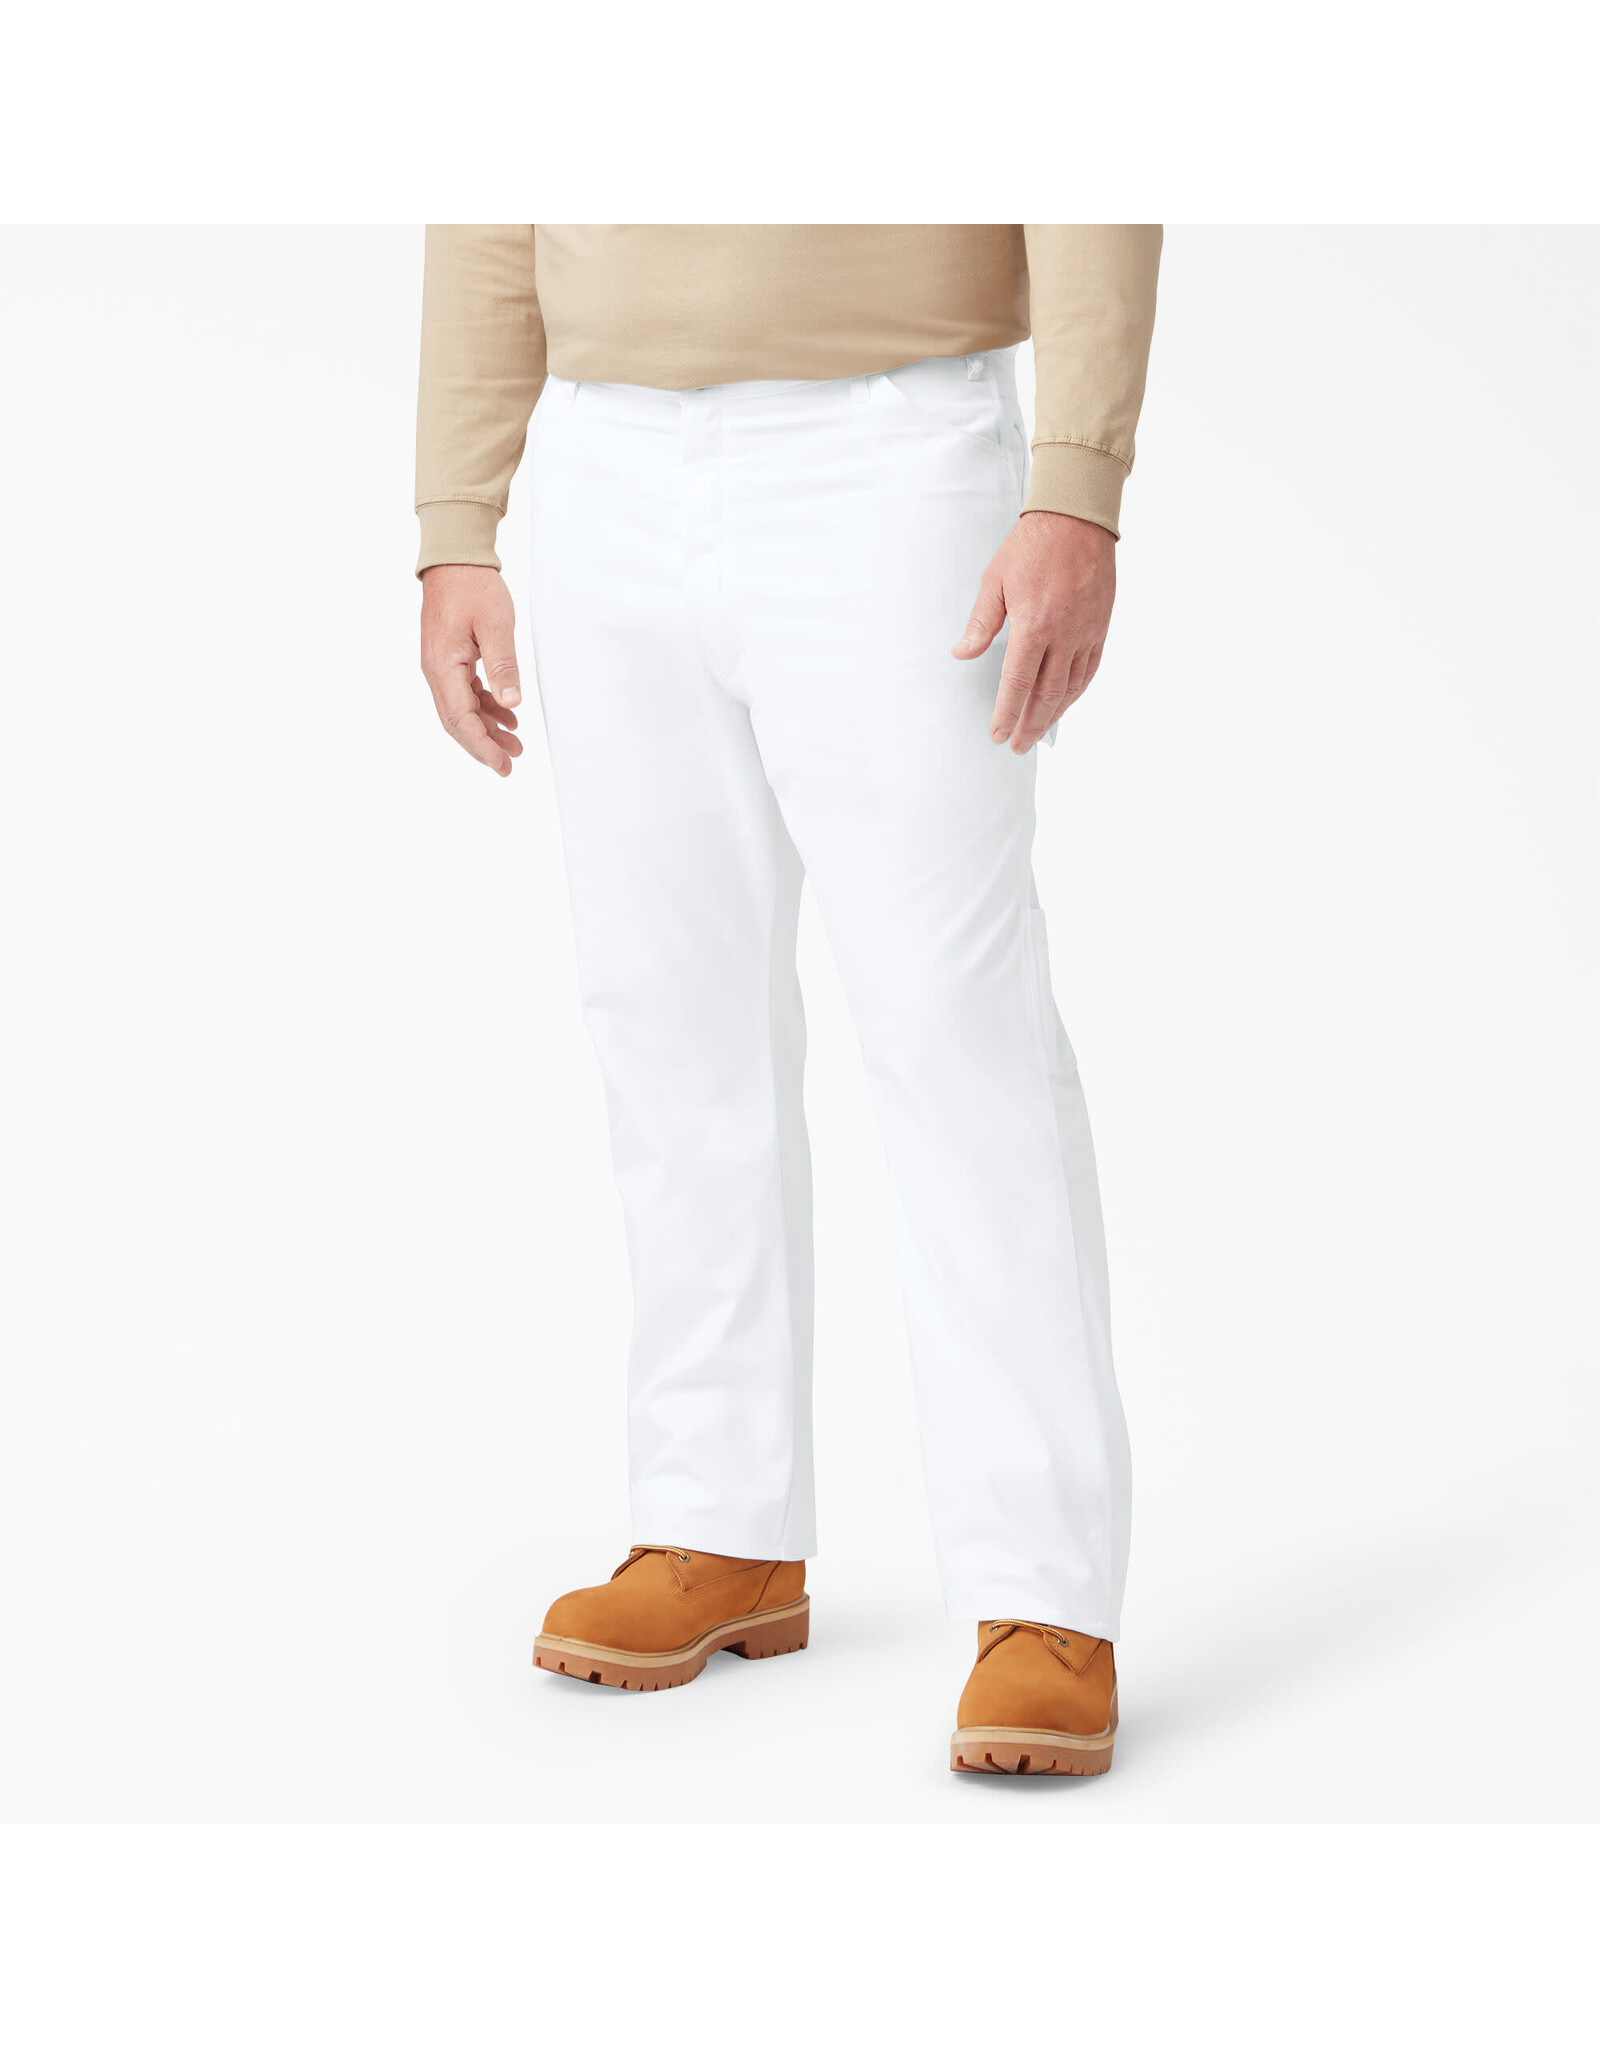 DICKIES Relaxed Fit Painter's Pant White - 1953WH